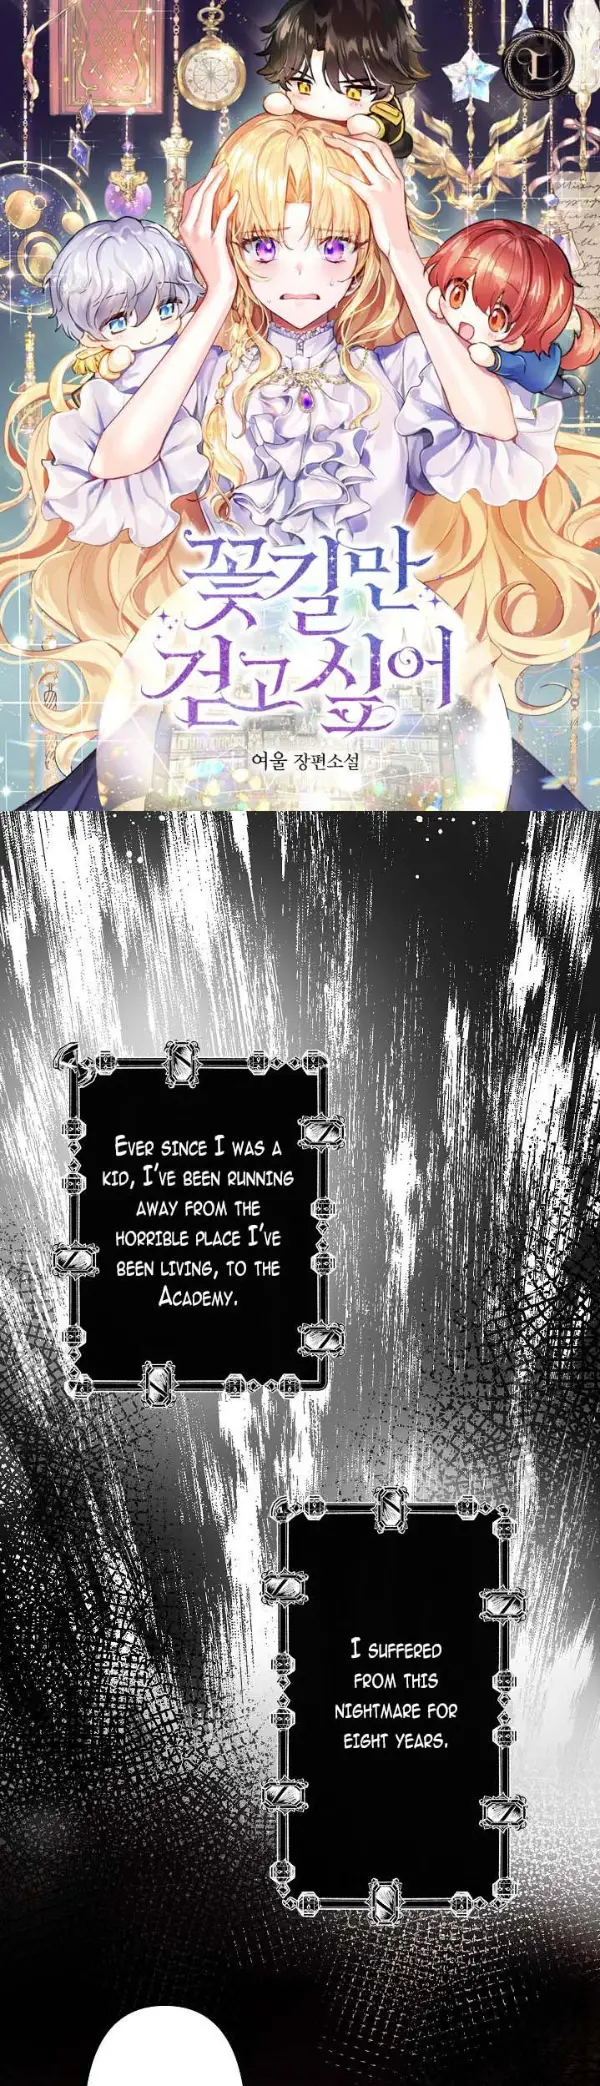 I Just Want To Walk On The Flower Road - Page 1